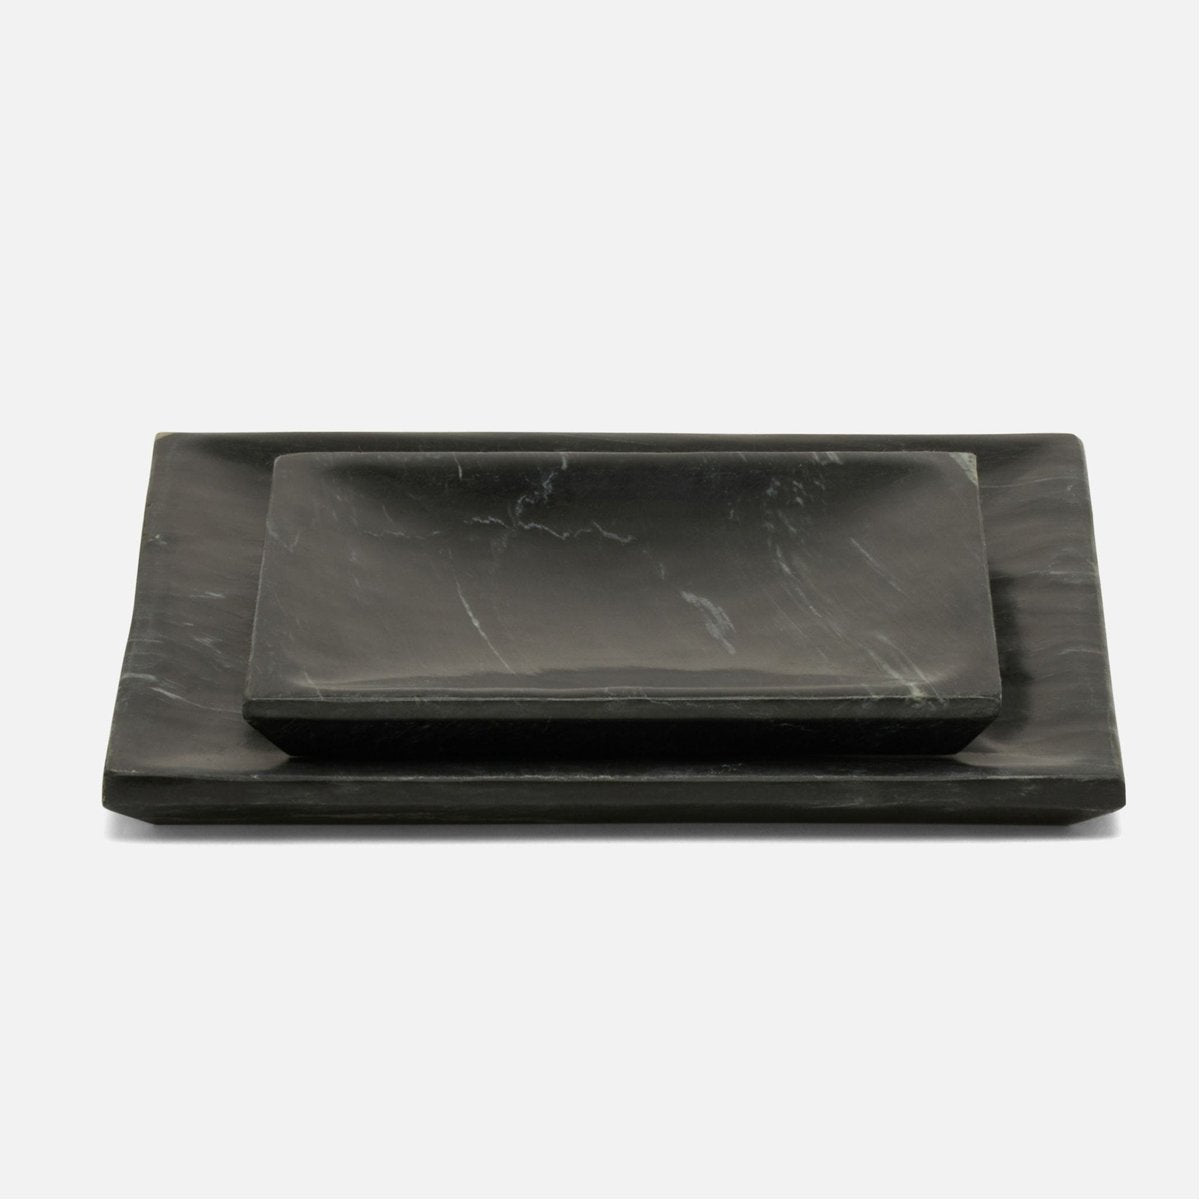 Pigeon and Poodle Elyria Square Tapered Trays, 2-Piece Set